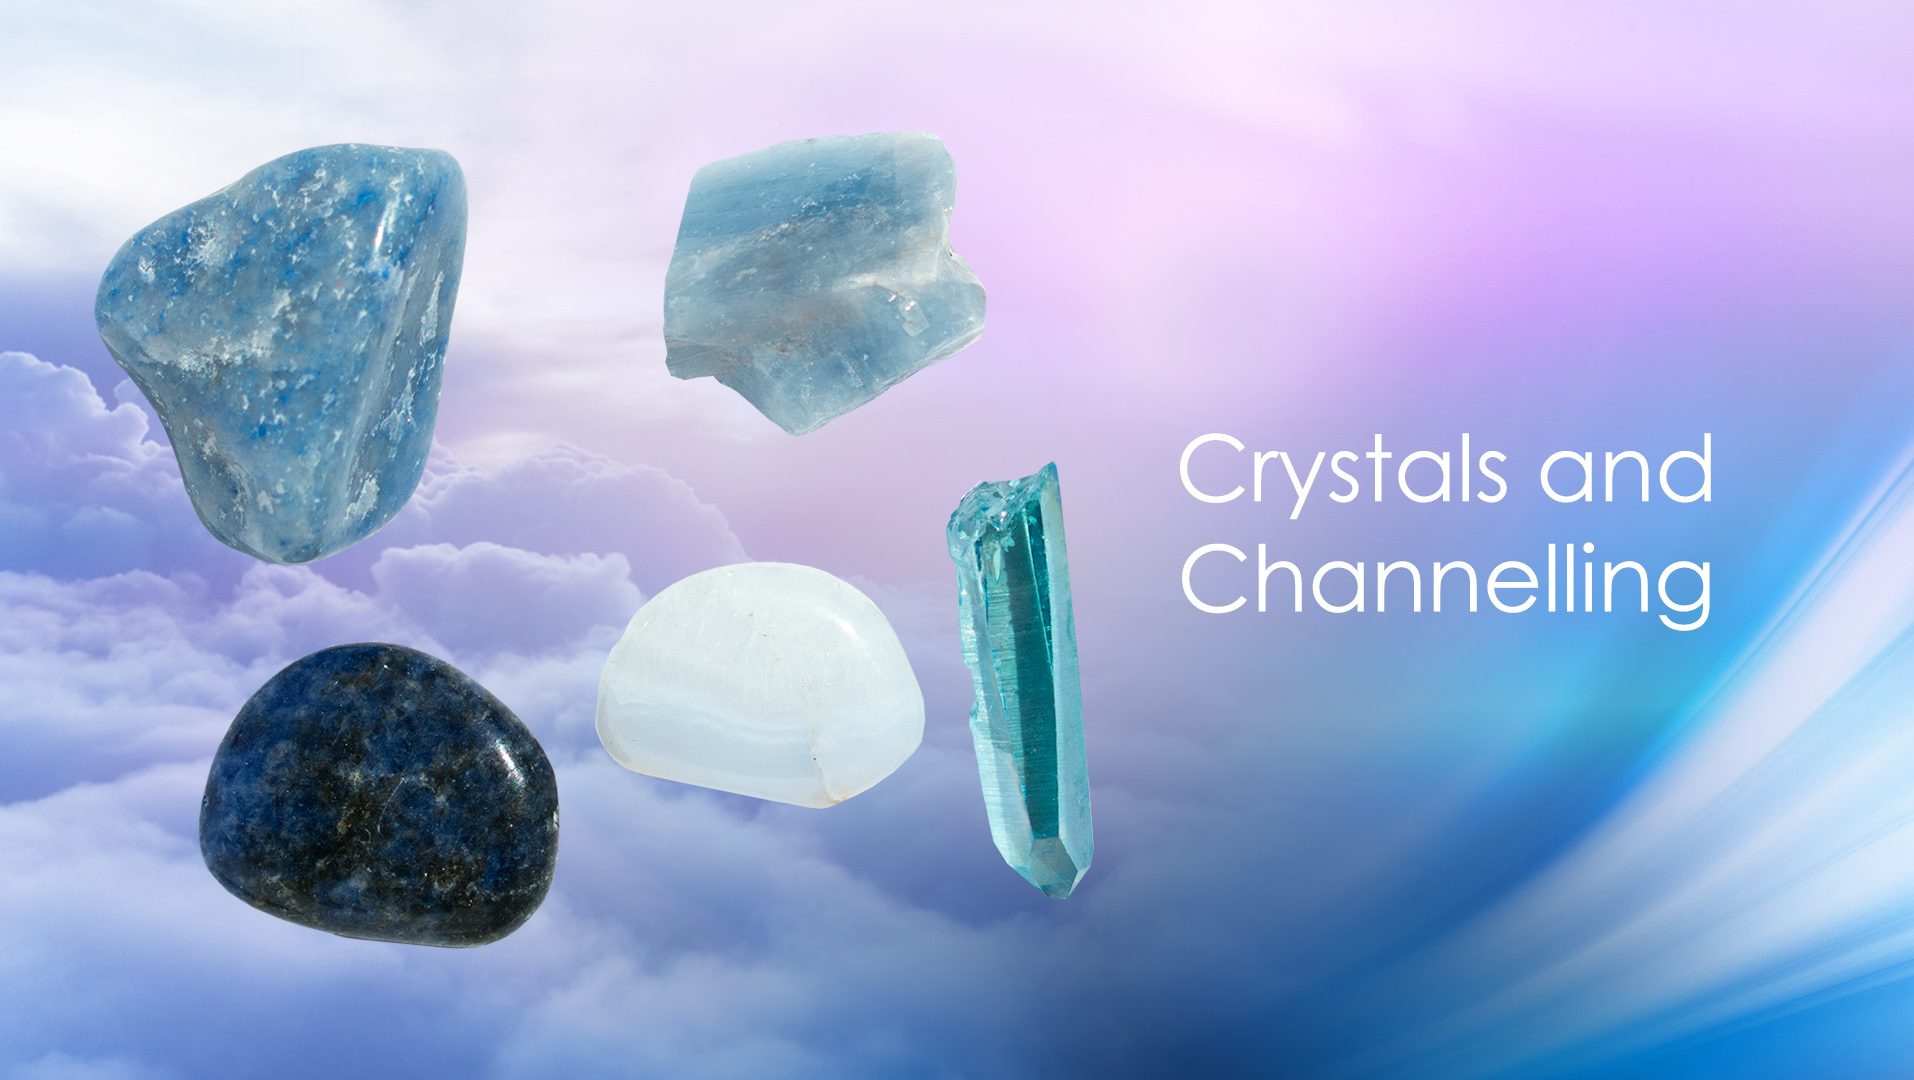 Crystals and Channelling